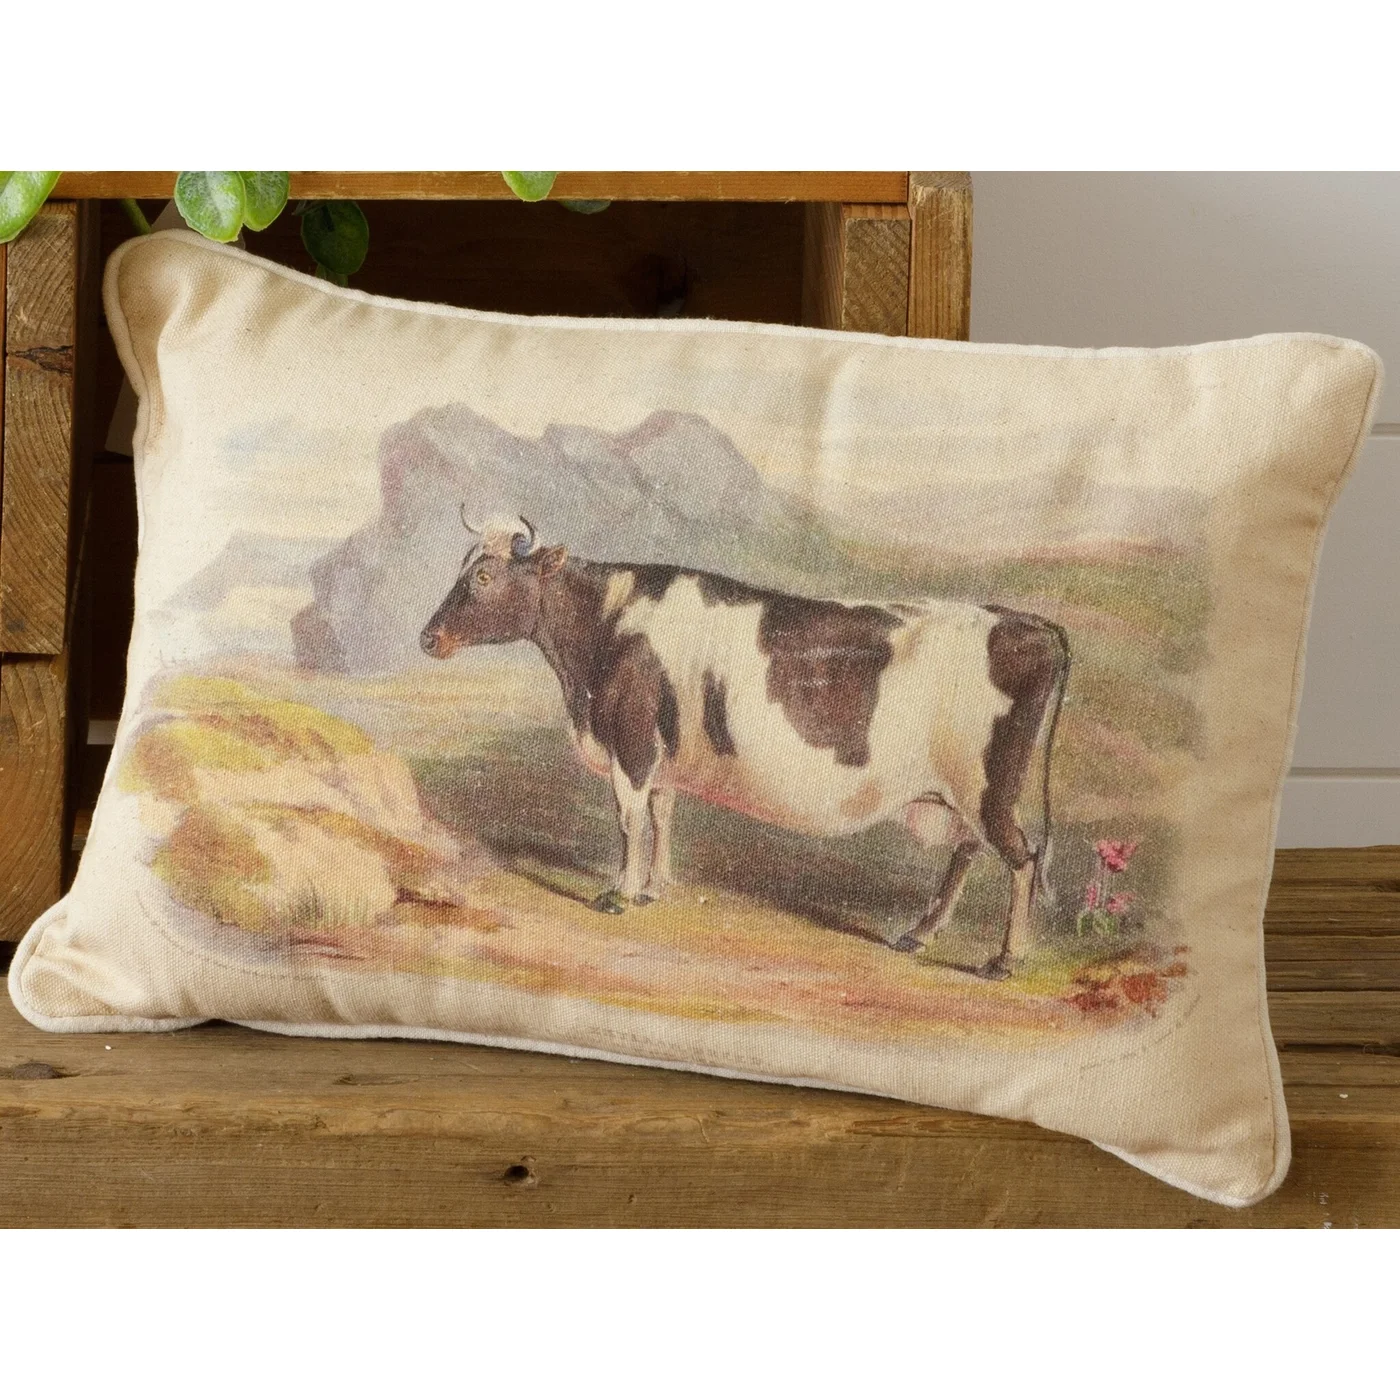 Vintage-Style Cow in Pasture 10" x 16" Accent Pillow